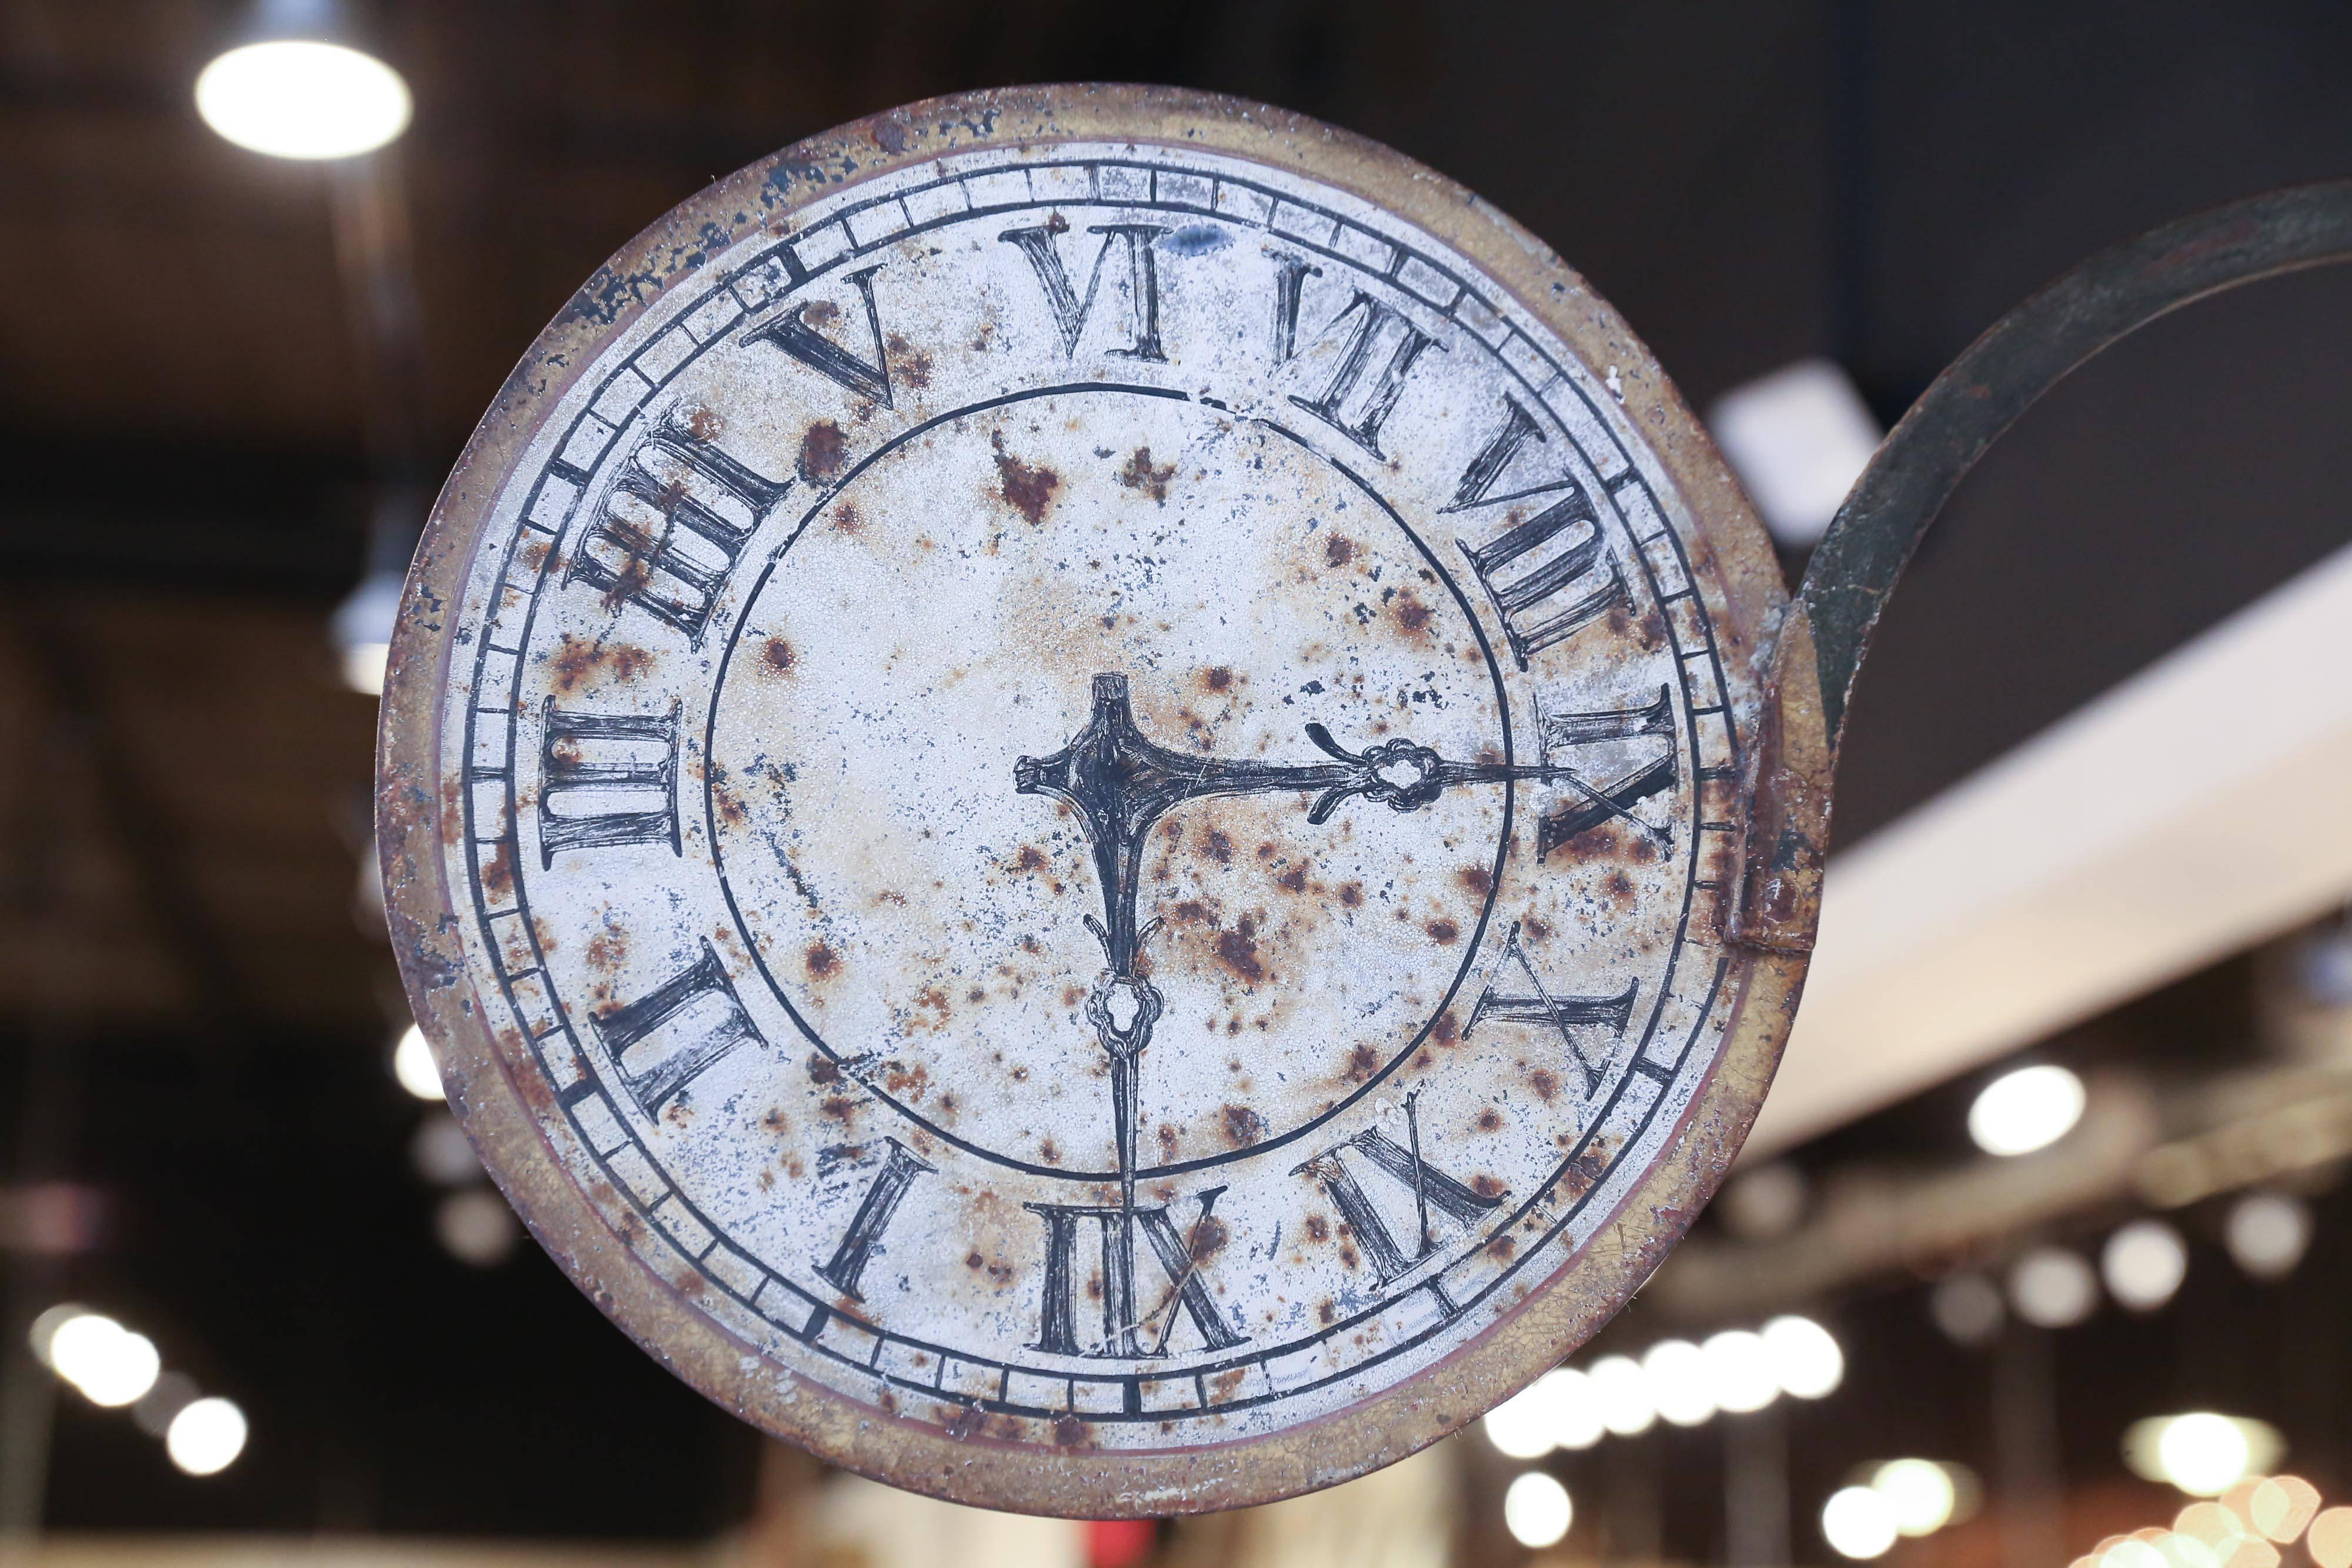 A unique and utterly charming sign from a clockmaker's shop in France. Made of iron and sheet metal, the 12 inch clock face is supported on a 28 inch iron bracket with a leaf embellishment. One side of the sign is beautifully aged and worn while the